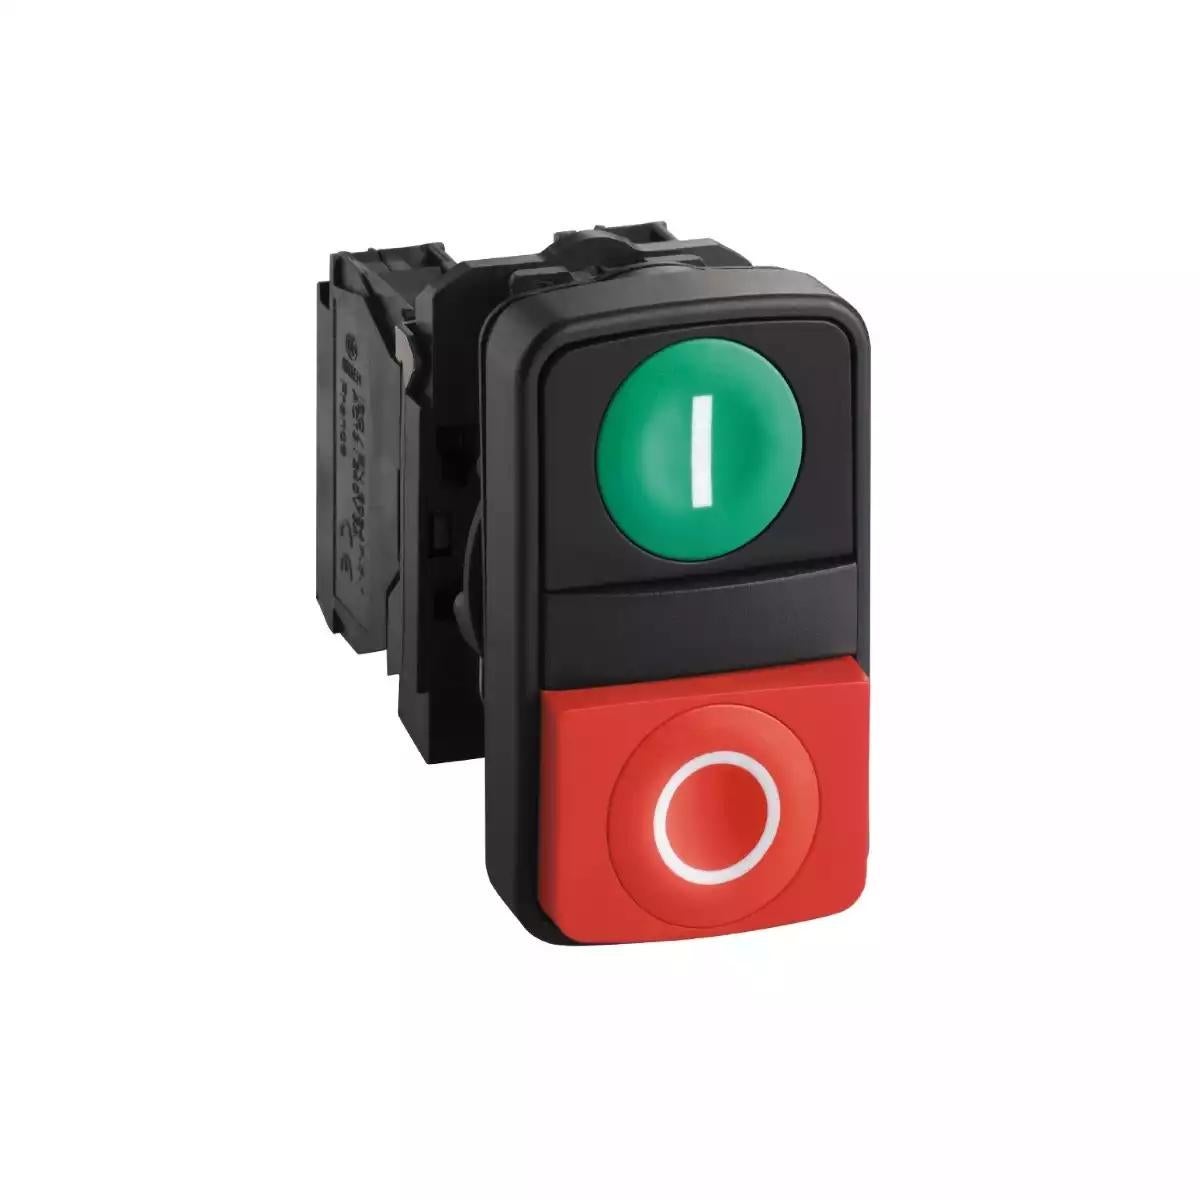 Double-headed push button, Harmony XB5, plastic, 22mm, 1 green flush marked I + 1 red projecting marked O, 1NO+1NC